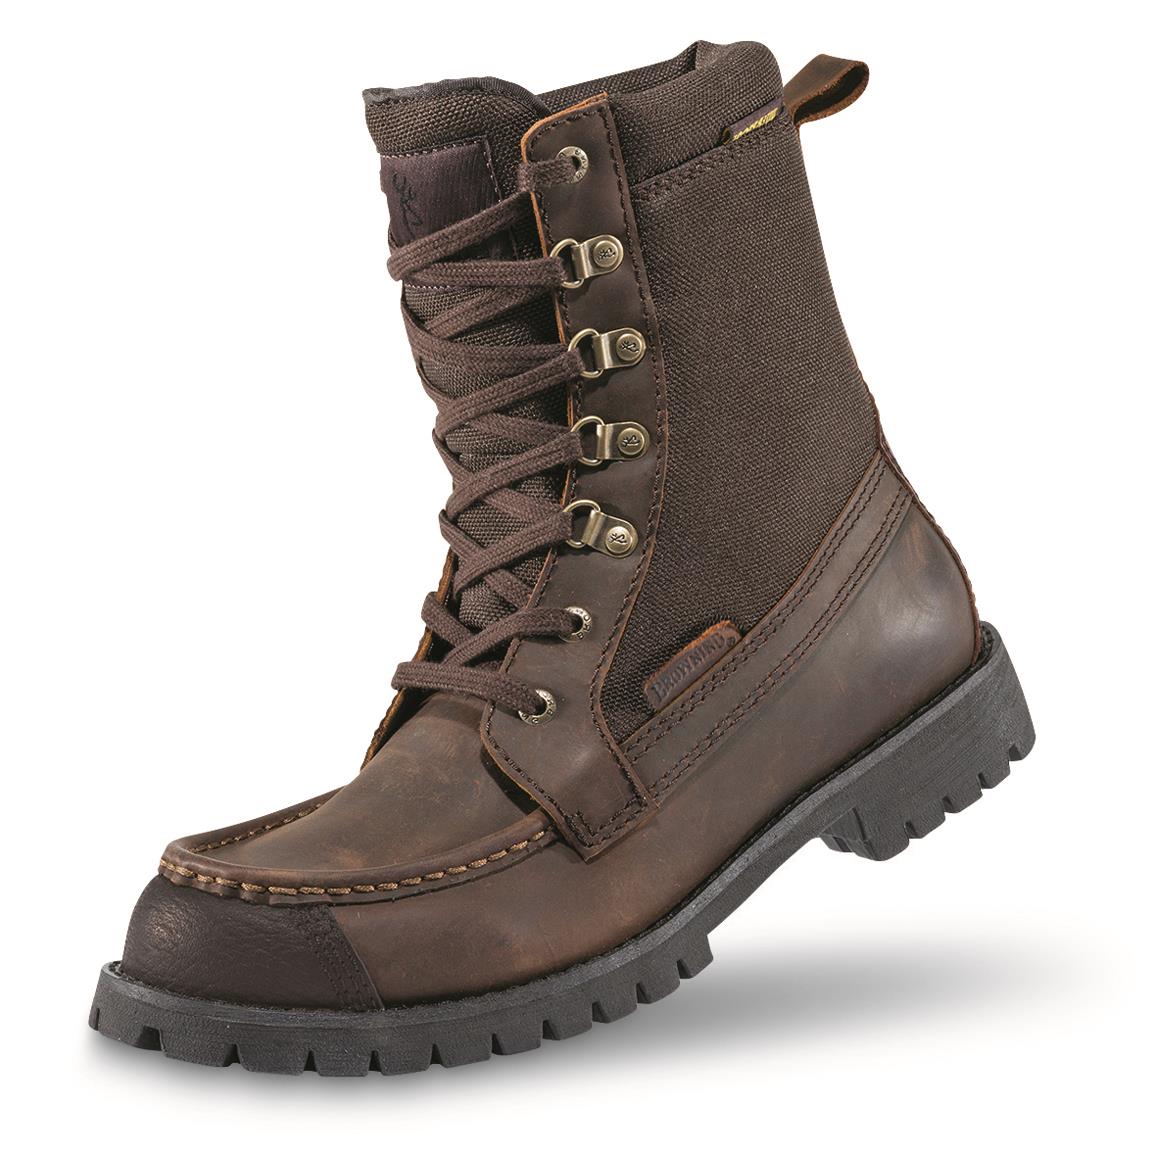 Browning Men's Featherweight Hunting Boots | vlr.eng.br